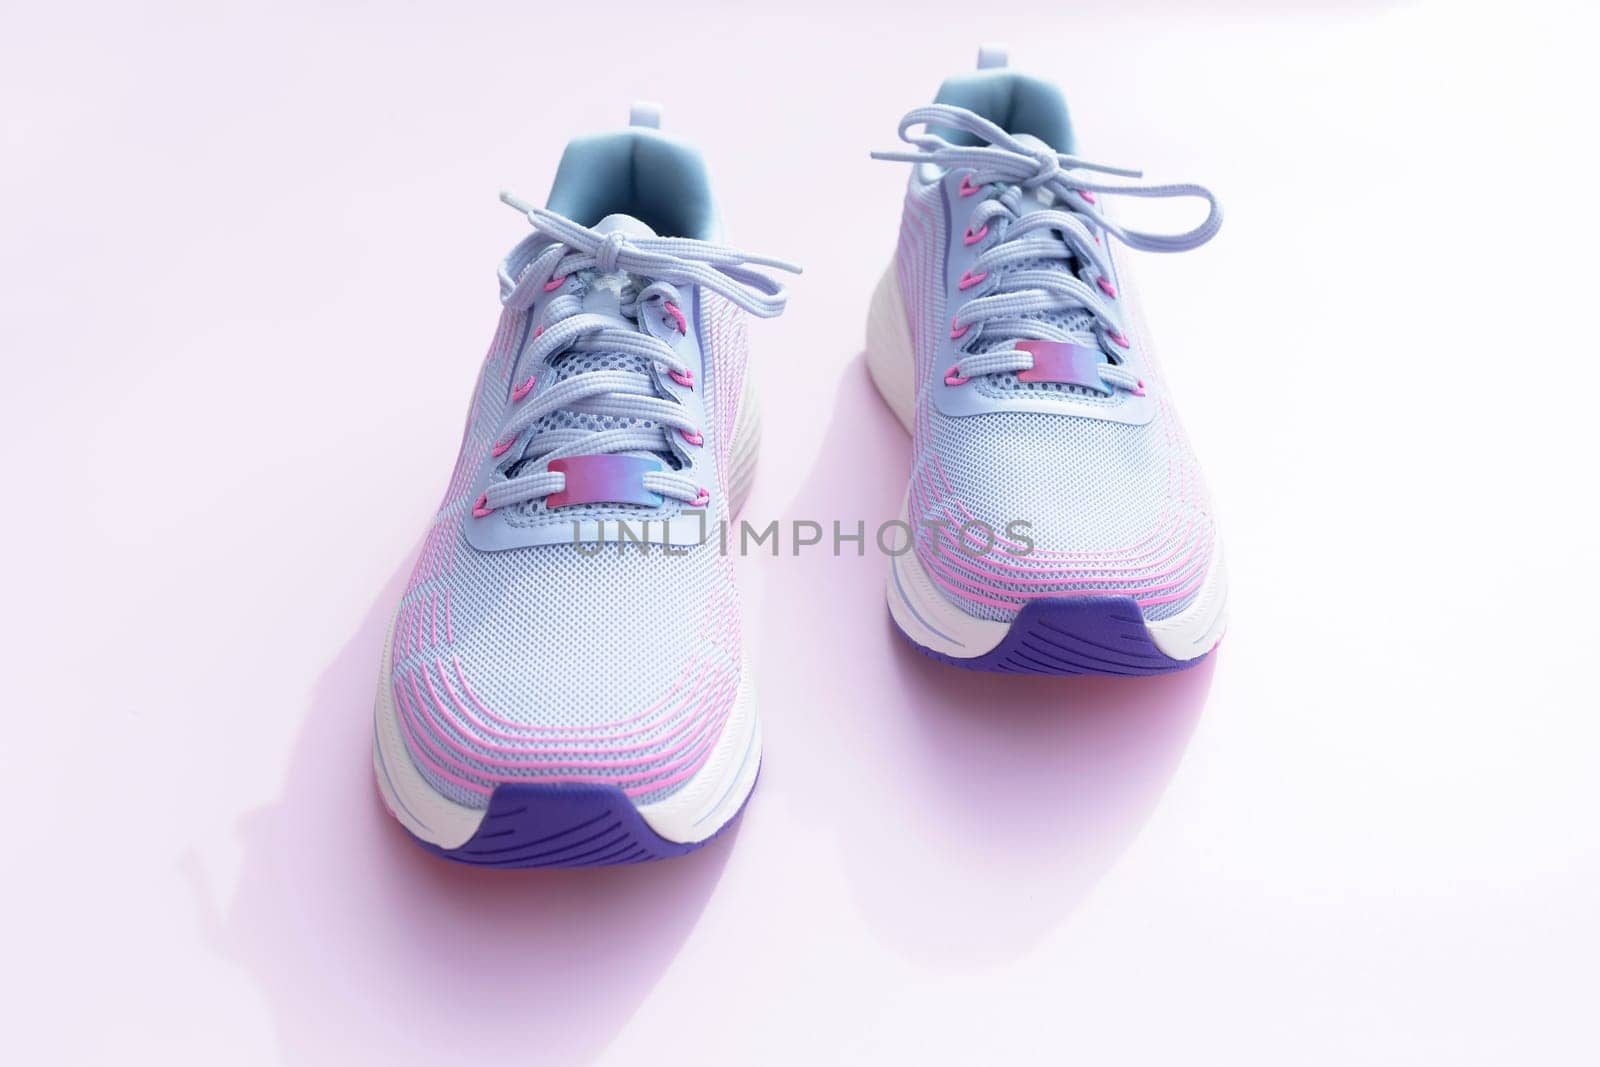 Purple Blue Female Sportive Running Shoes on Pink Background. Fashion, Training Footwear for Gym, Shoes For Woman. National Shoe The World Day. Horizontal Plane by netatsi